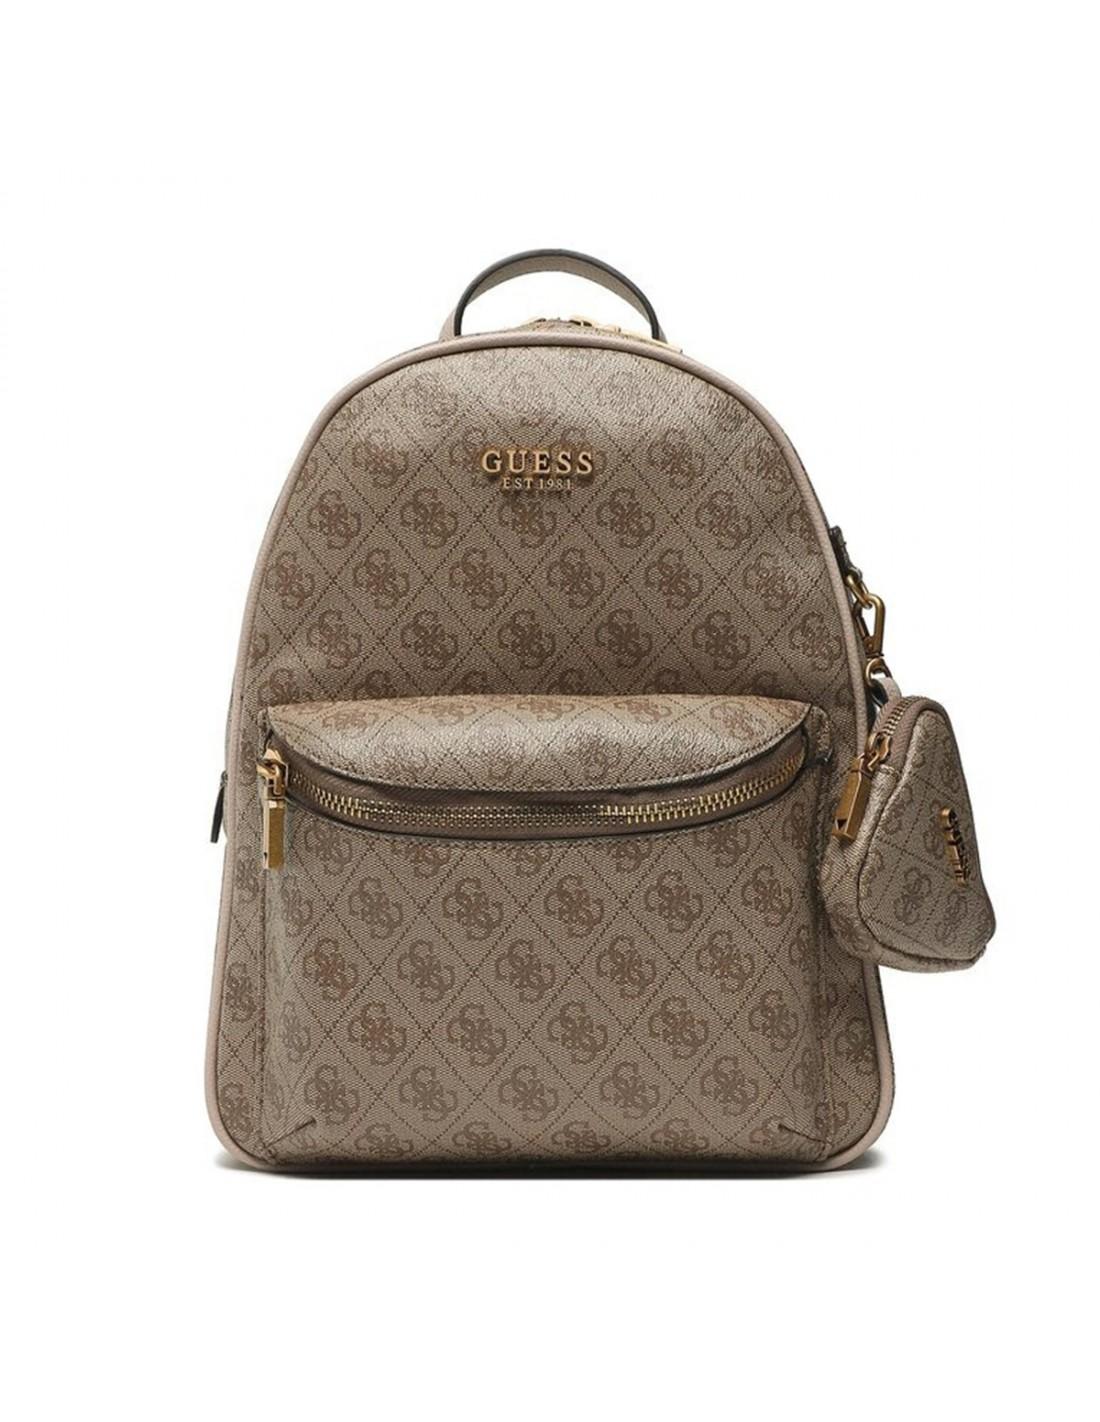 Guess Backpack House Party 4g Logo - Color: Brow in Gray | Lyst